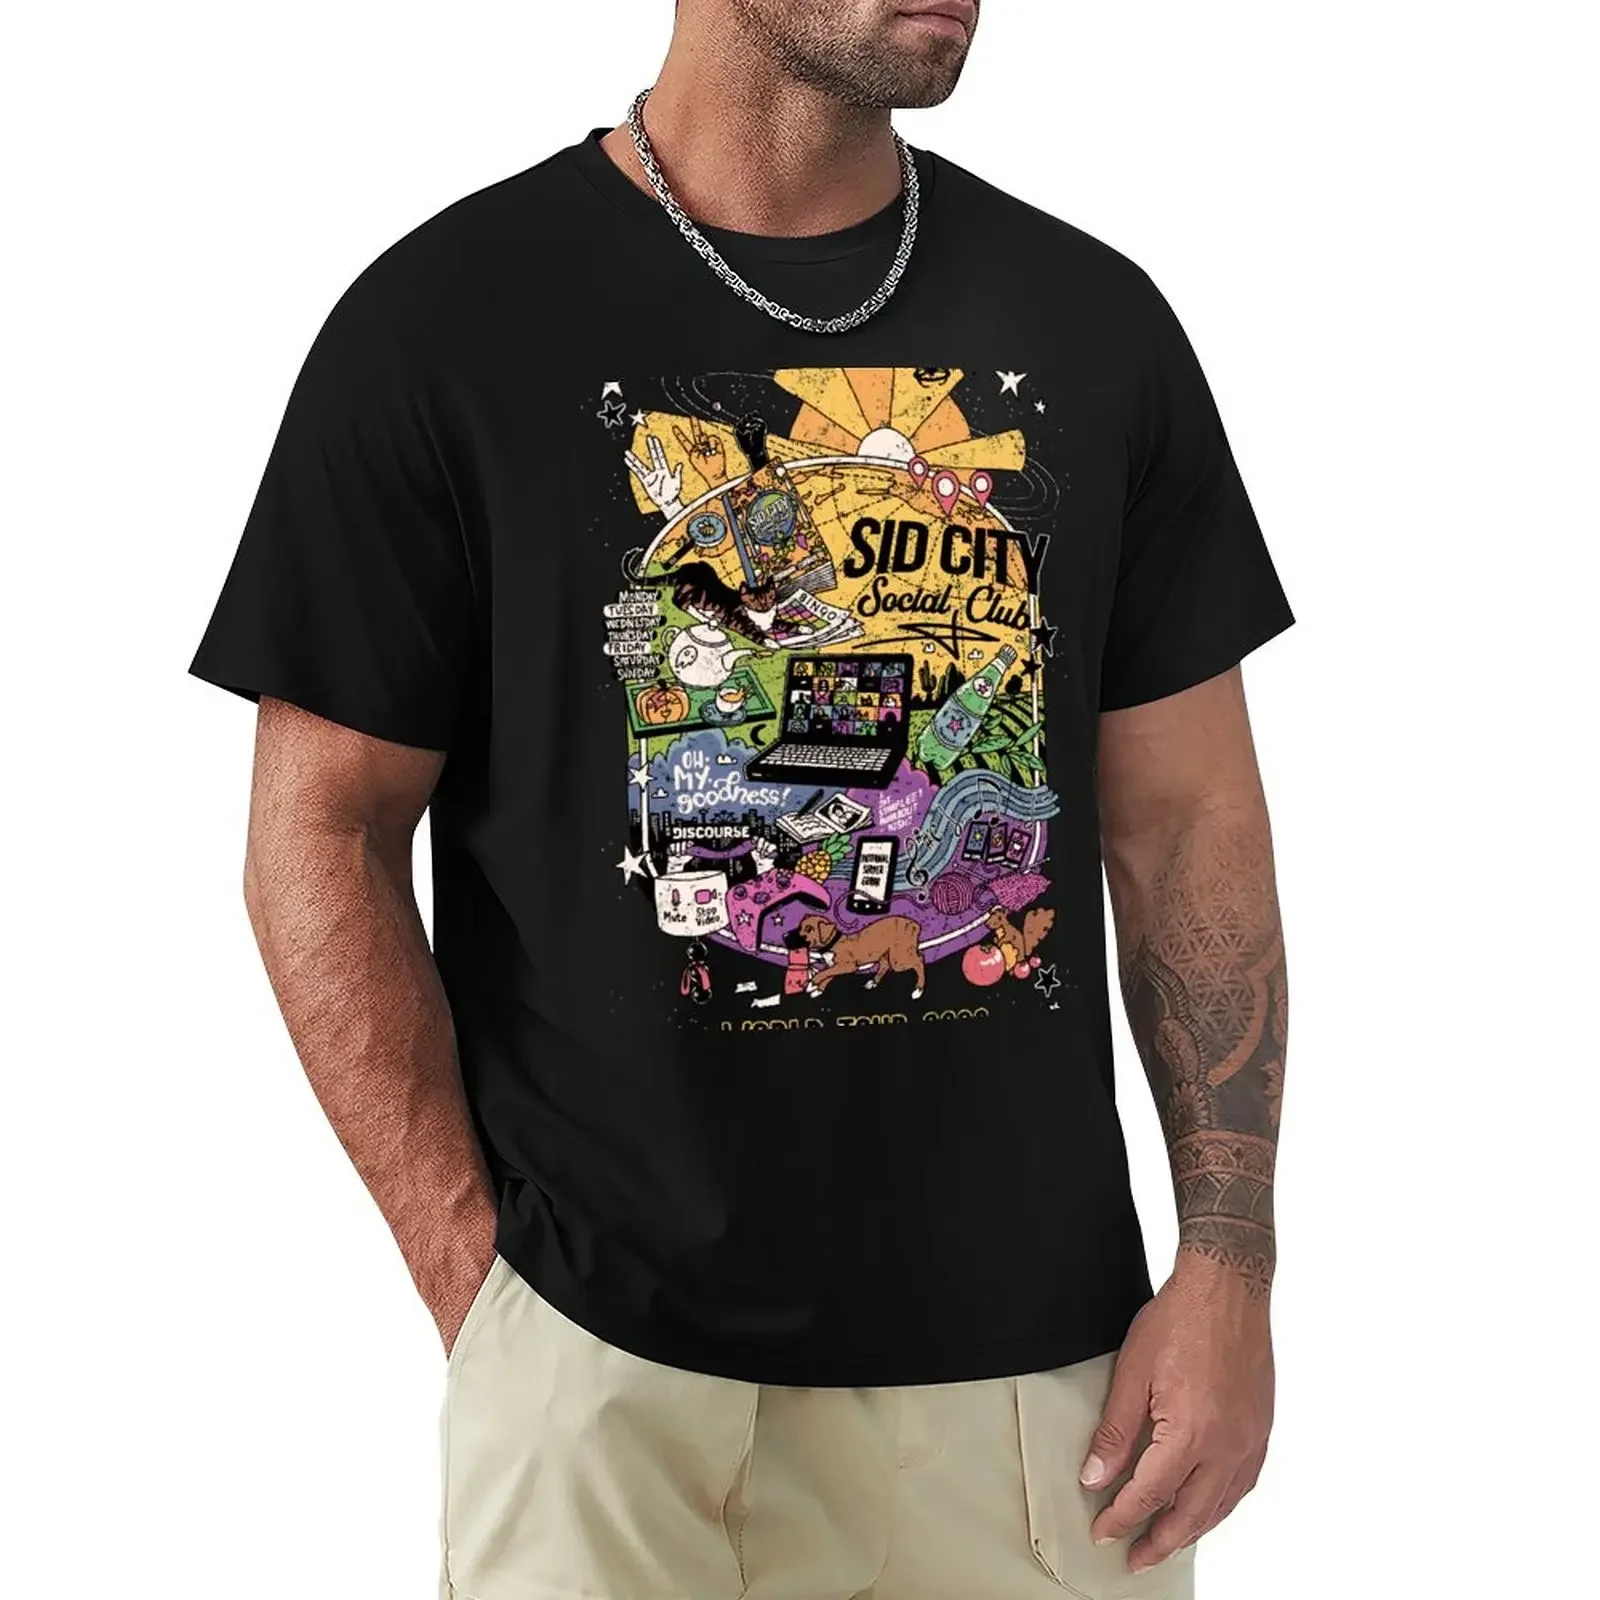 

Sid City Social Club World Tour 2020 (DISTRESSED) T-Shirt anime clothes oversized t shirts for men